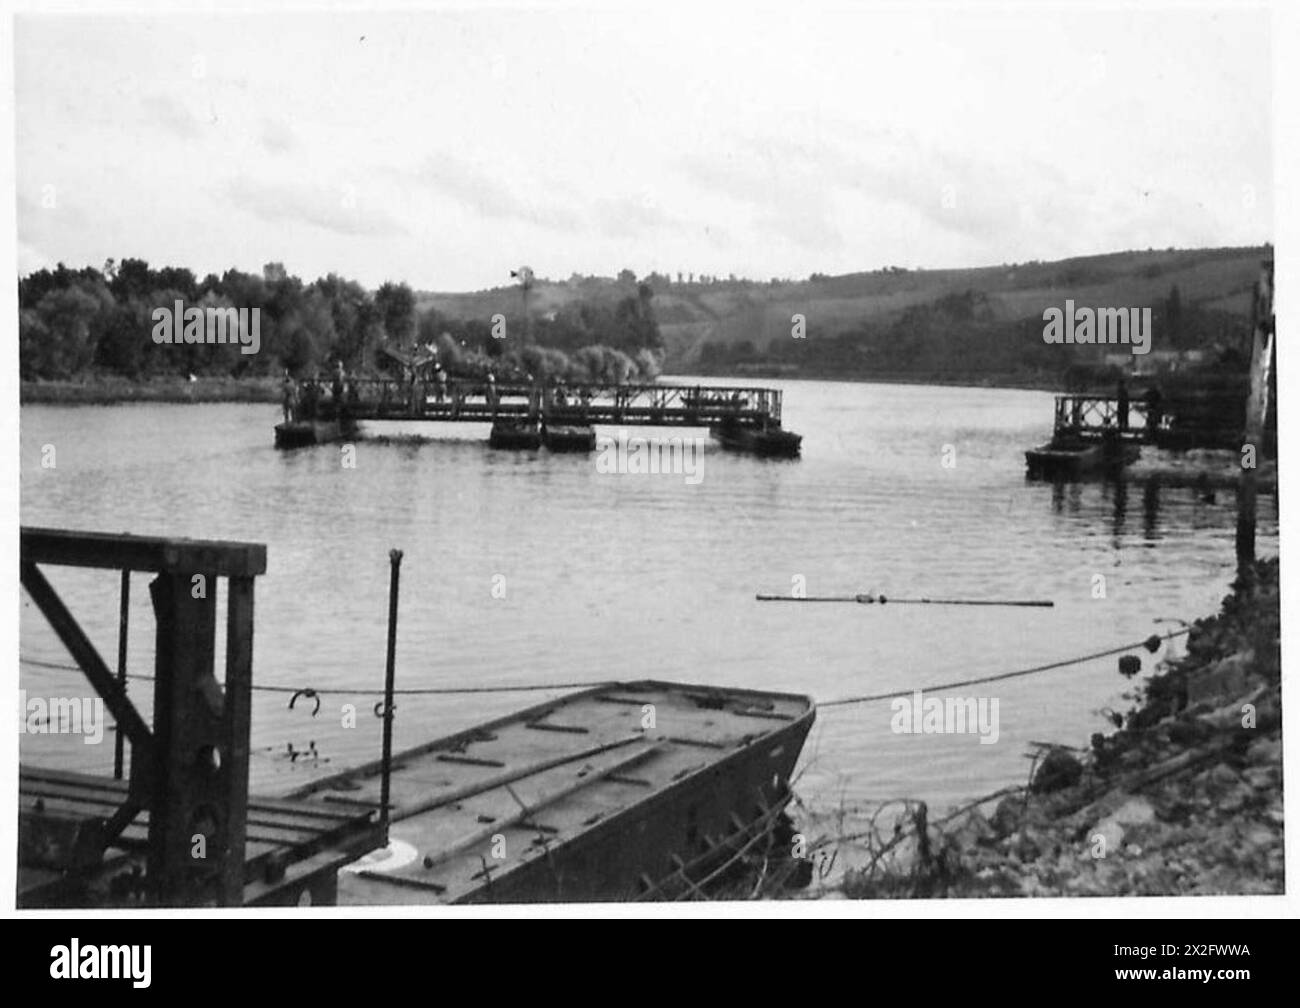 BUILDING A CLASS 40 FLOATING BAILEY BRIDGE OVER THE SEINE - Two pontoon sections being towed to connect to landing bay British Army, 21st Army Group Stock Photo